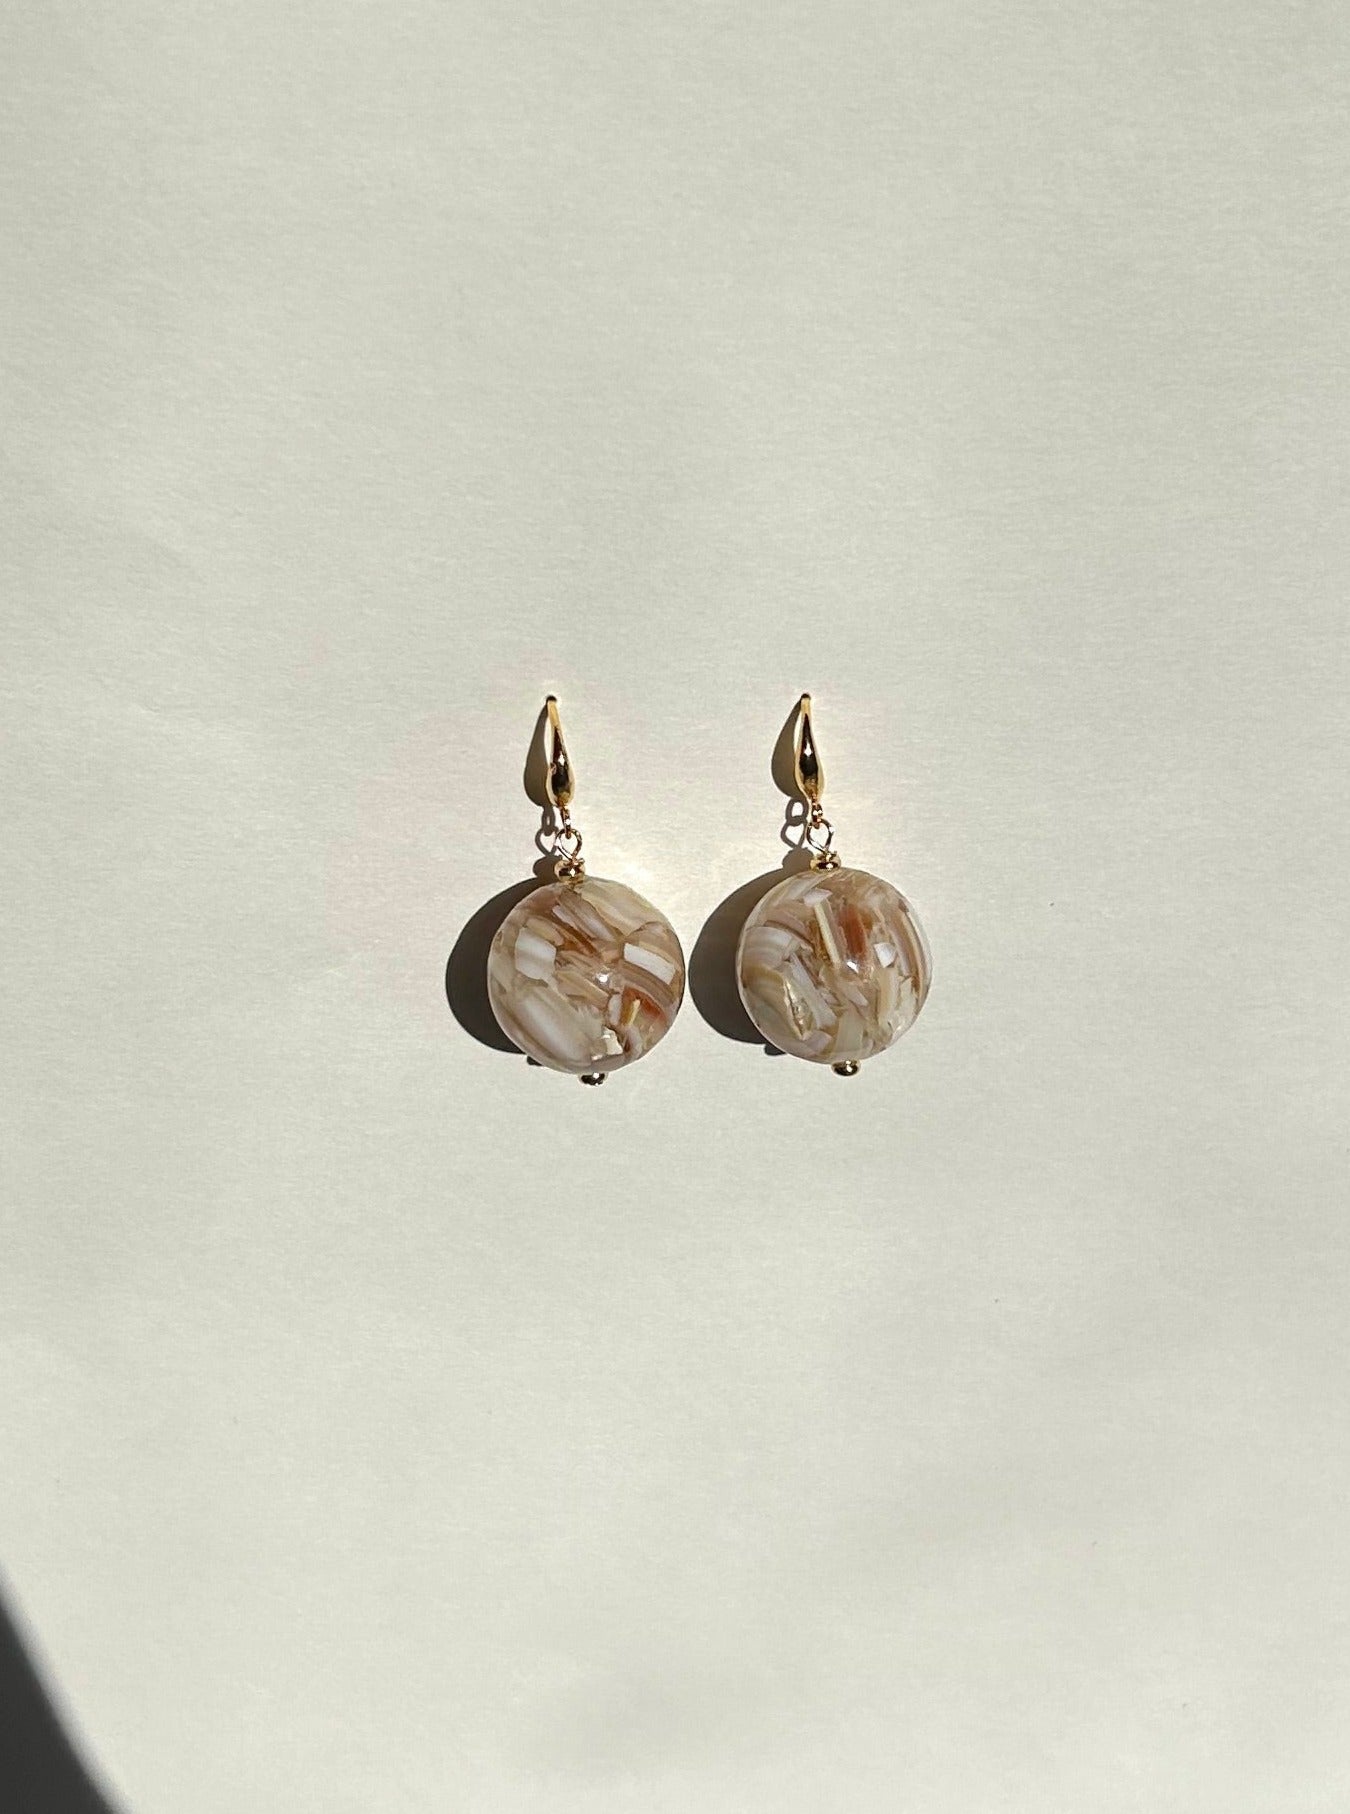 Sunset Earrings in Mother of Pearl